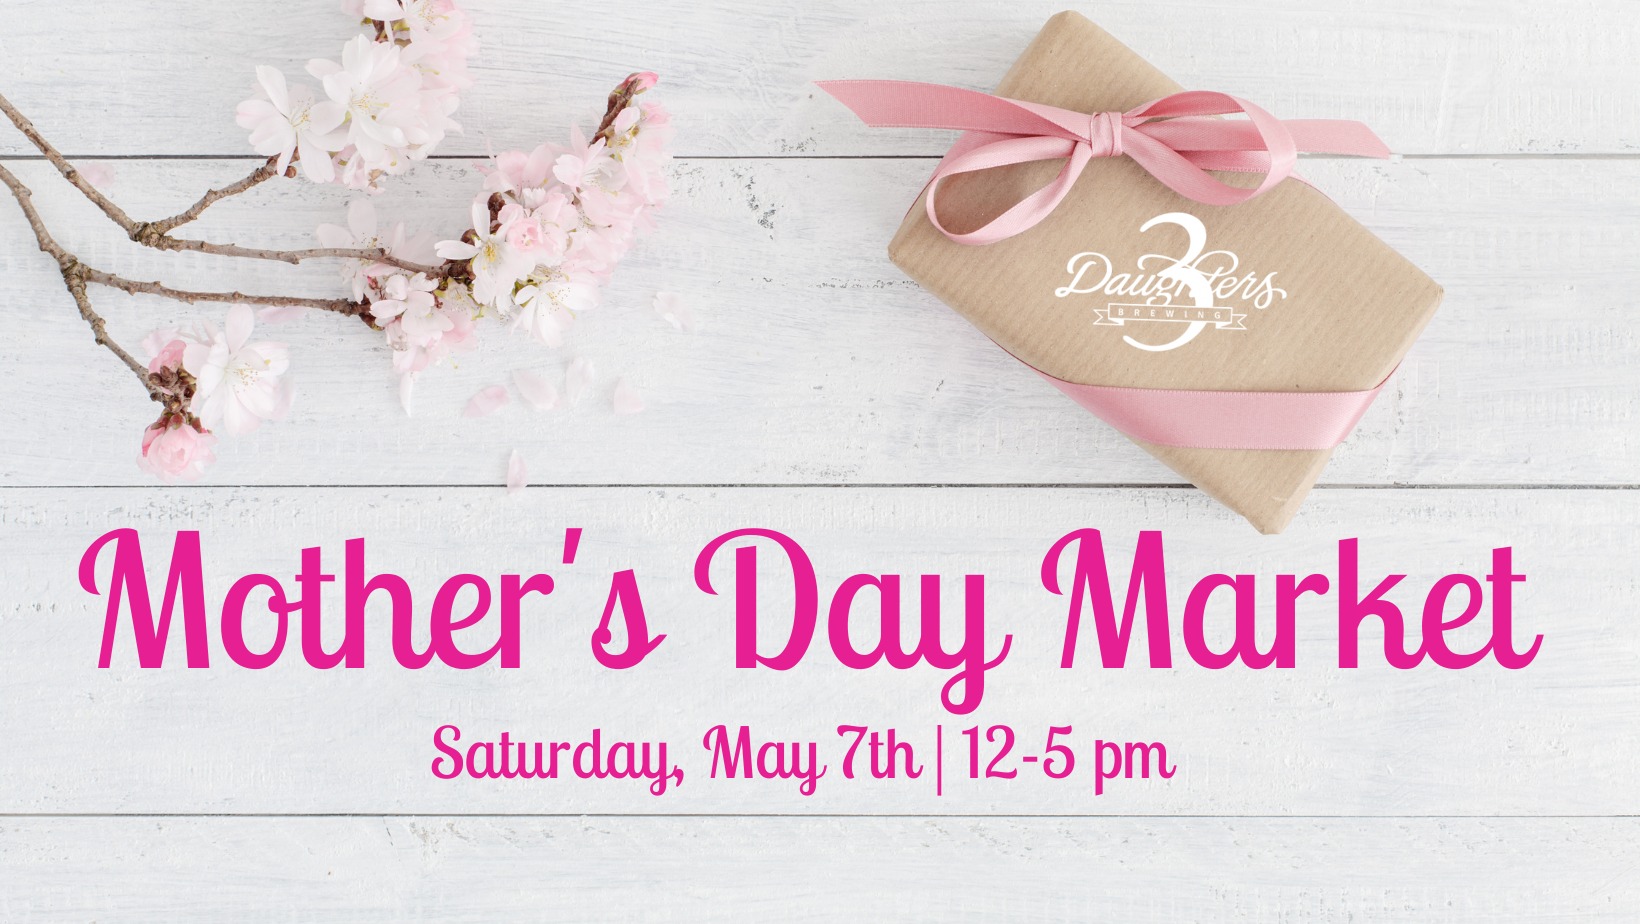 Mother’s Day Market